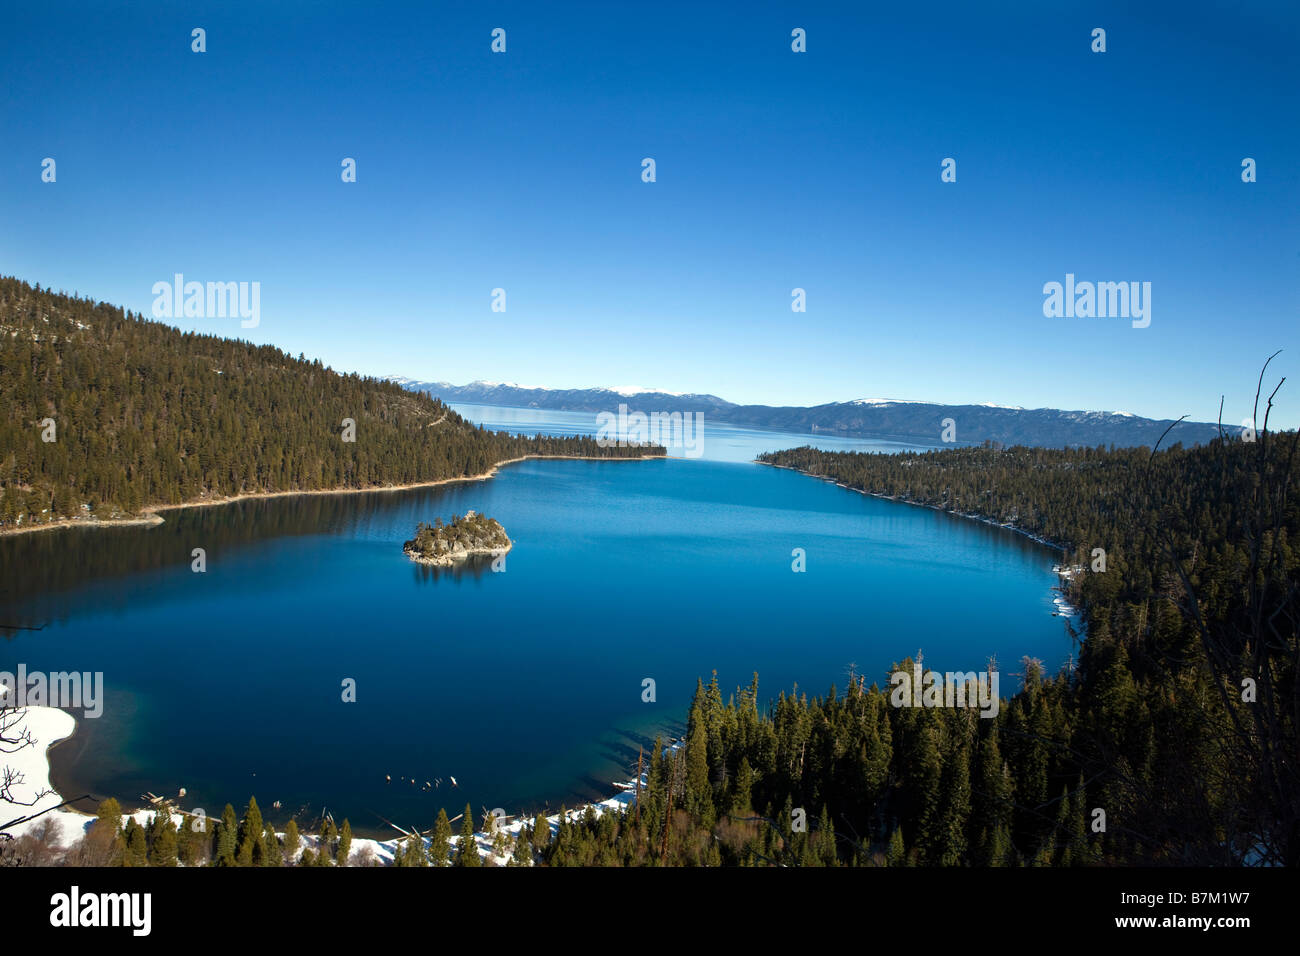 Fannette Island the only island in Lake Tahoe sits in Emerald Bay Emerald Bay State Park Lake Tahoe California Stock Photo